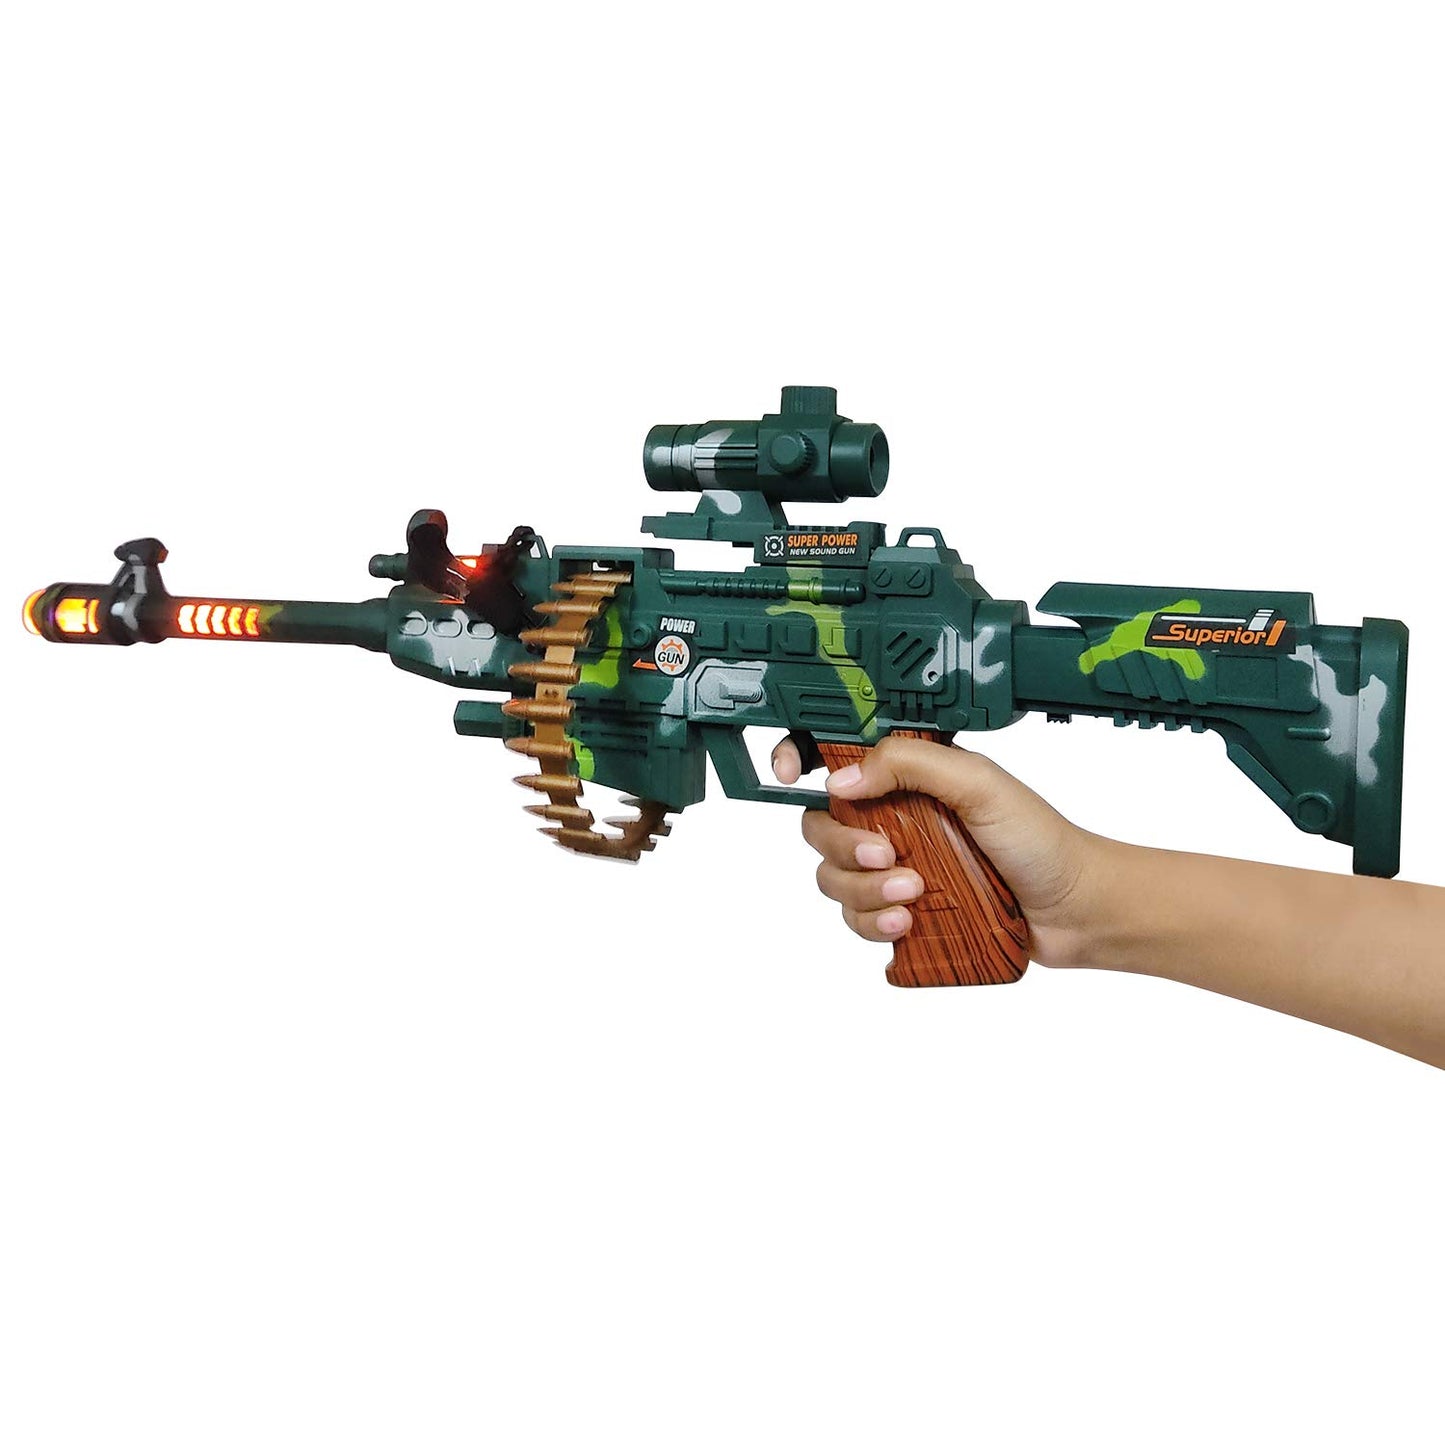 Machine Gun With Lights, Machine Gun With Scope Stand And Carrying Strap Flashing Lights, Sounds And Unique Revolving Rounds For Kids Guns & Darts